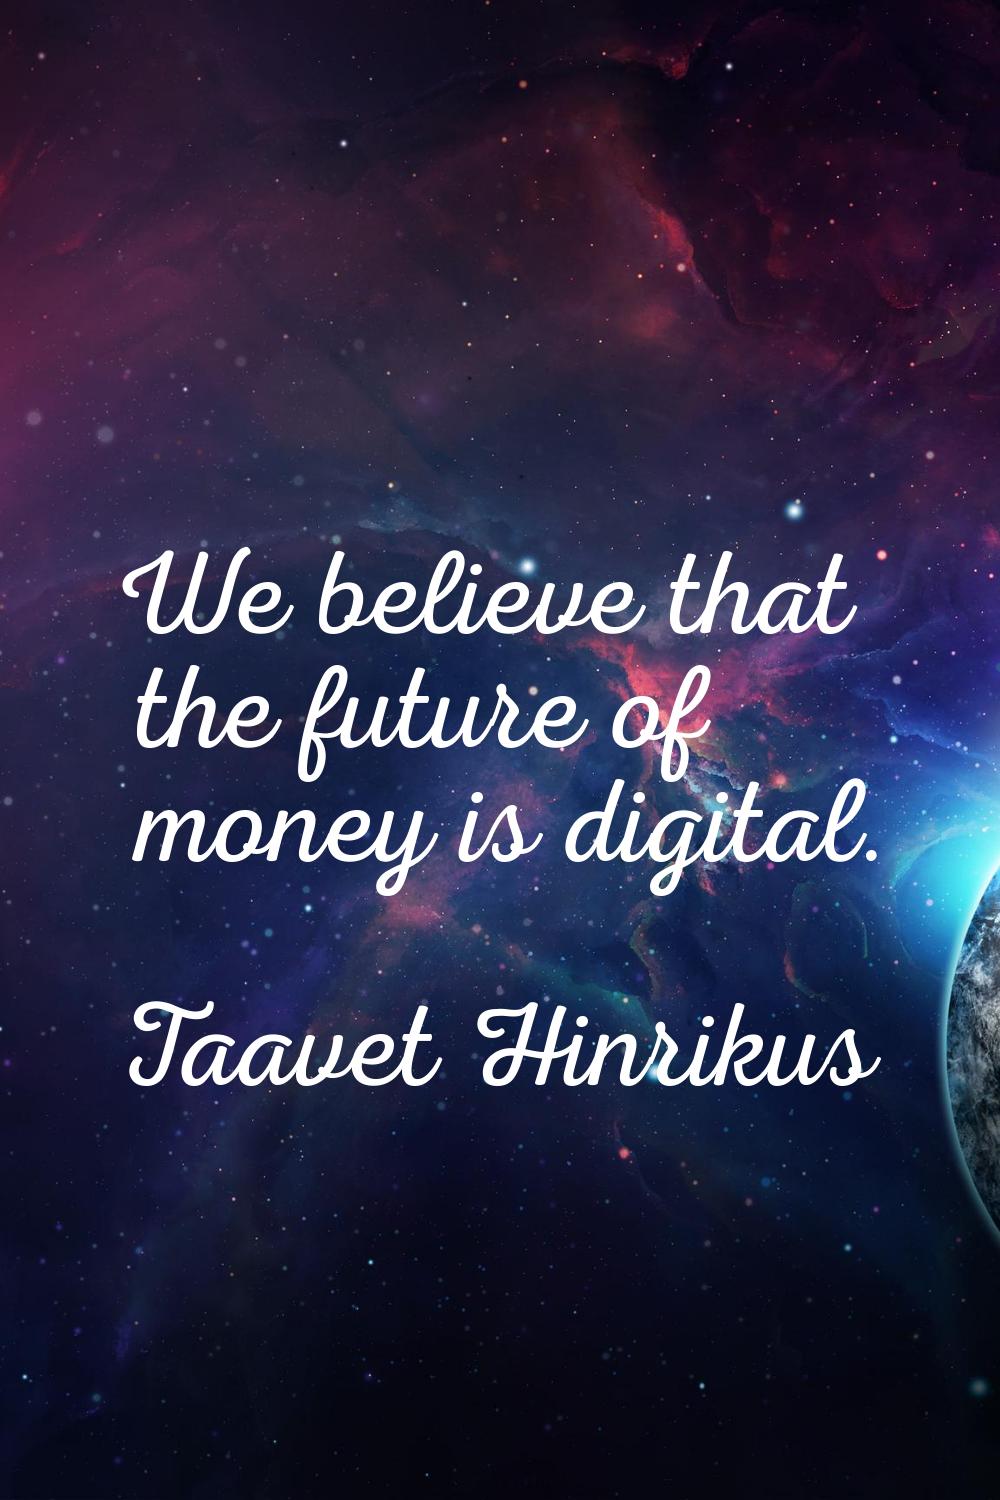 We believe that the future of money is digital.